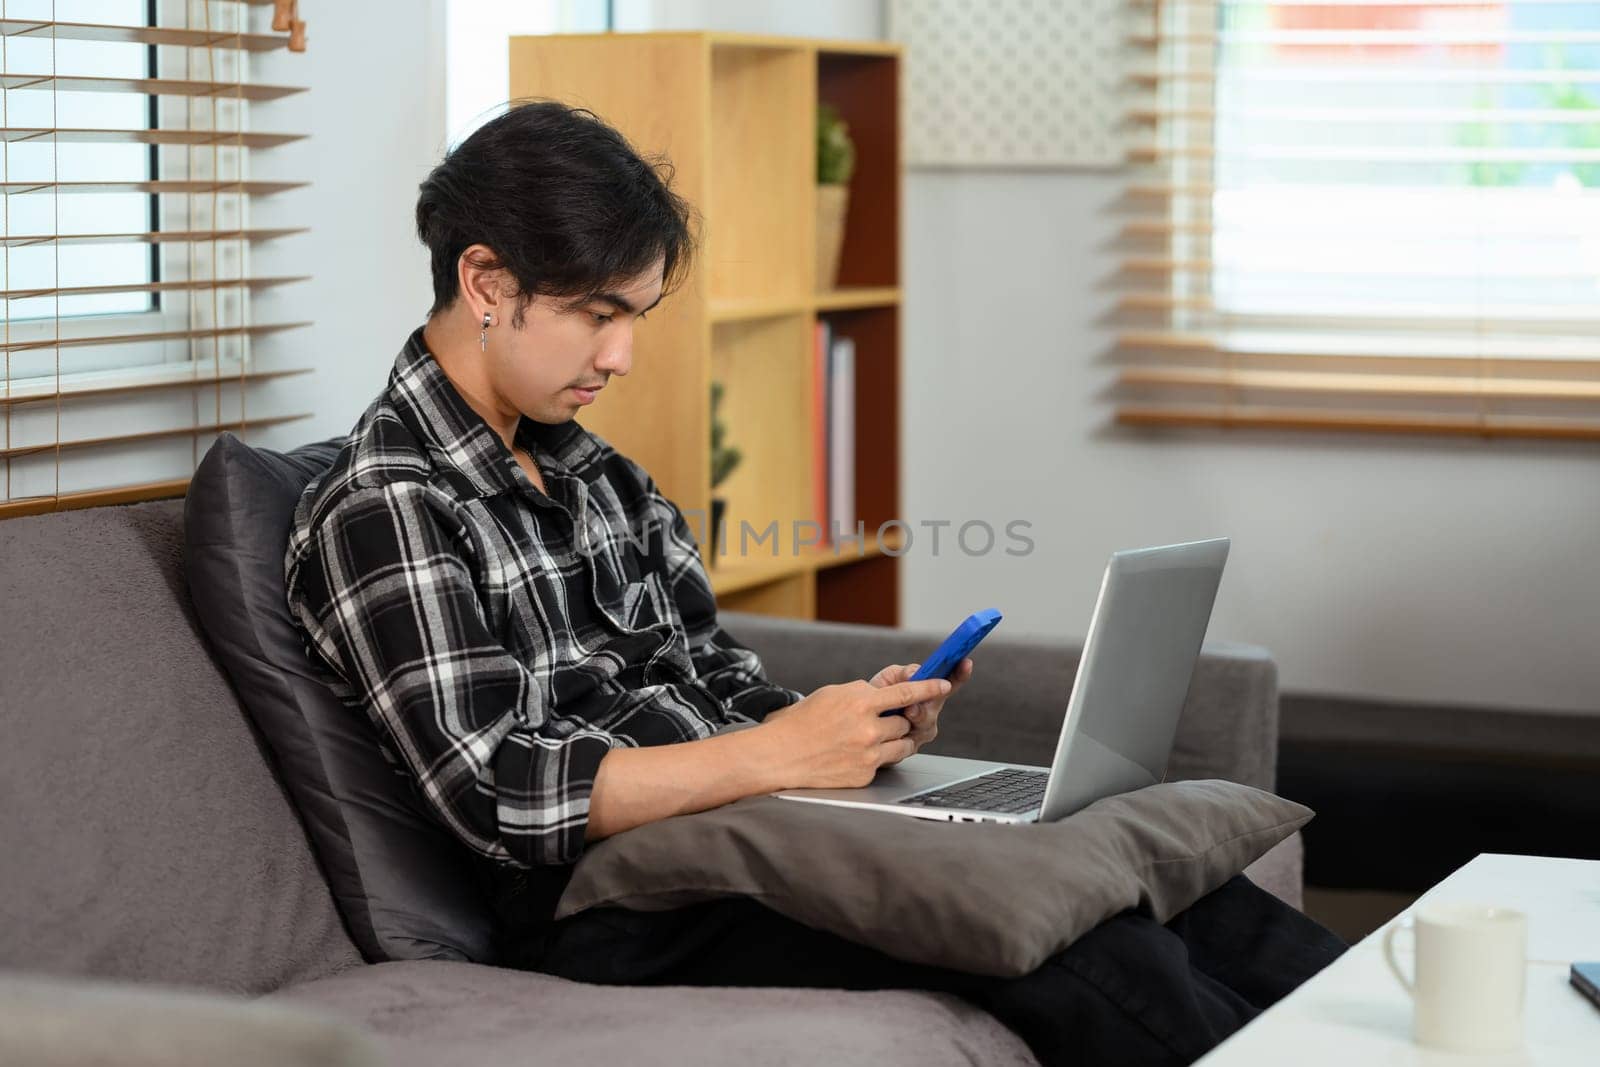 Focused young man using laptop and smartphone on couch in living room.